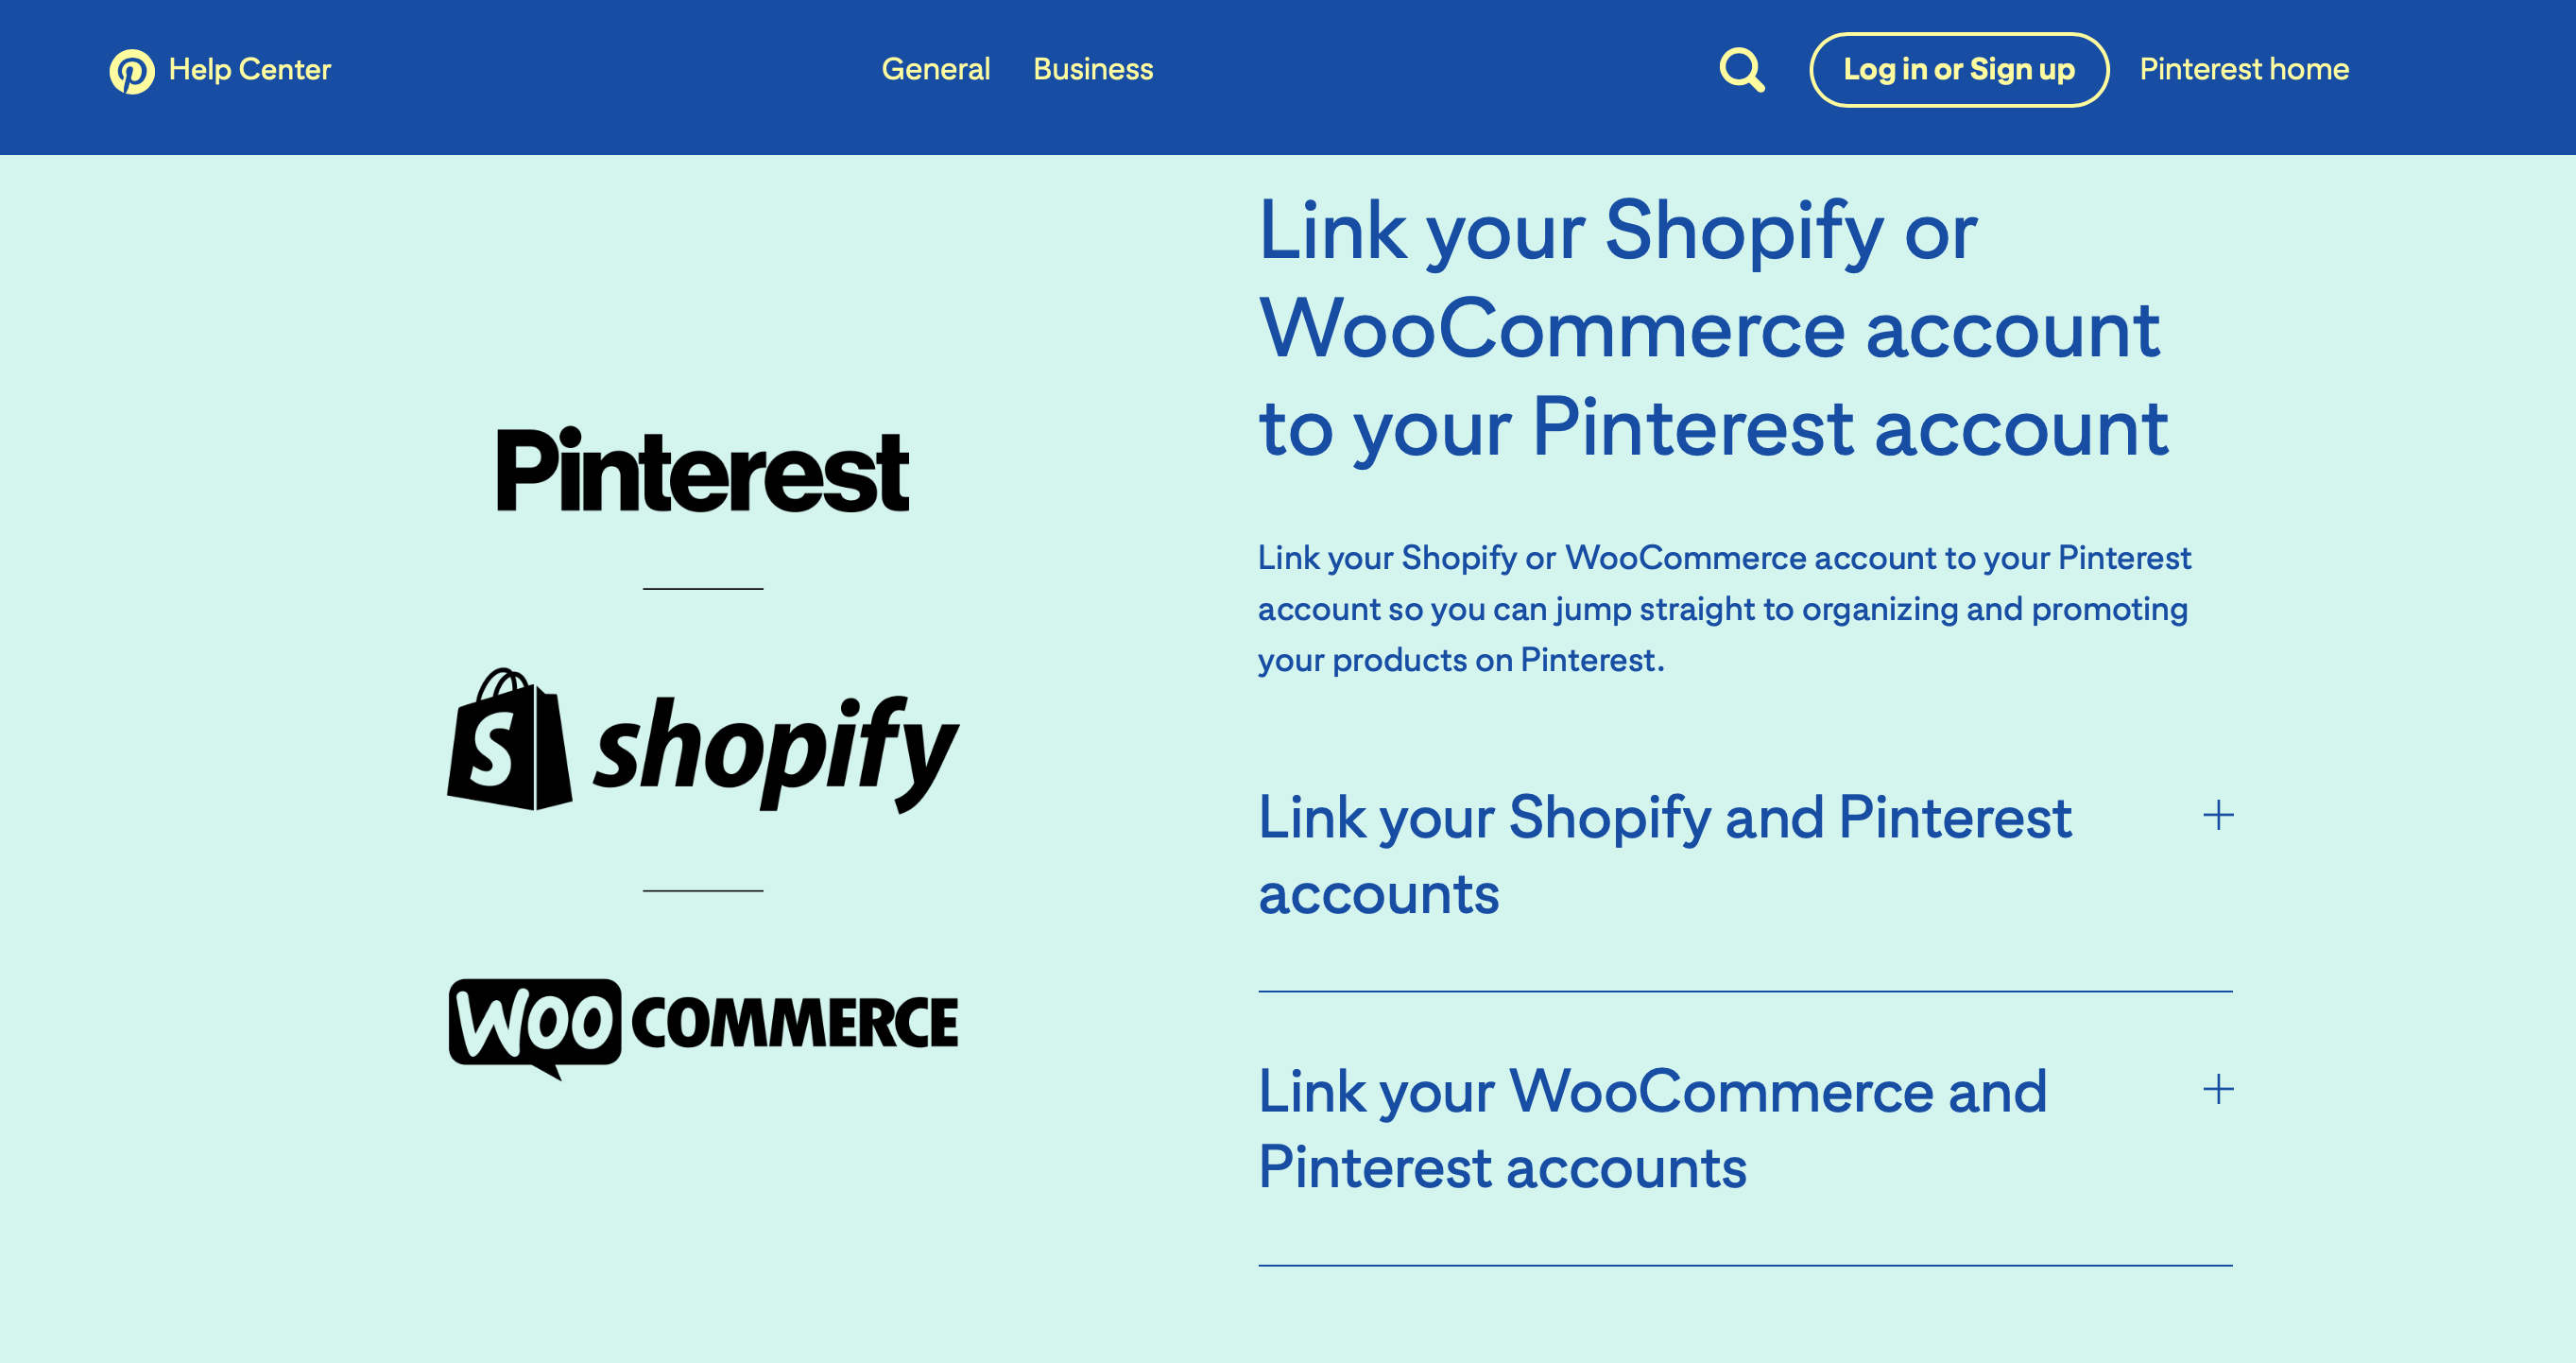 Link your accounts to Pinterest